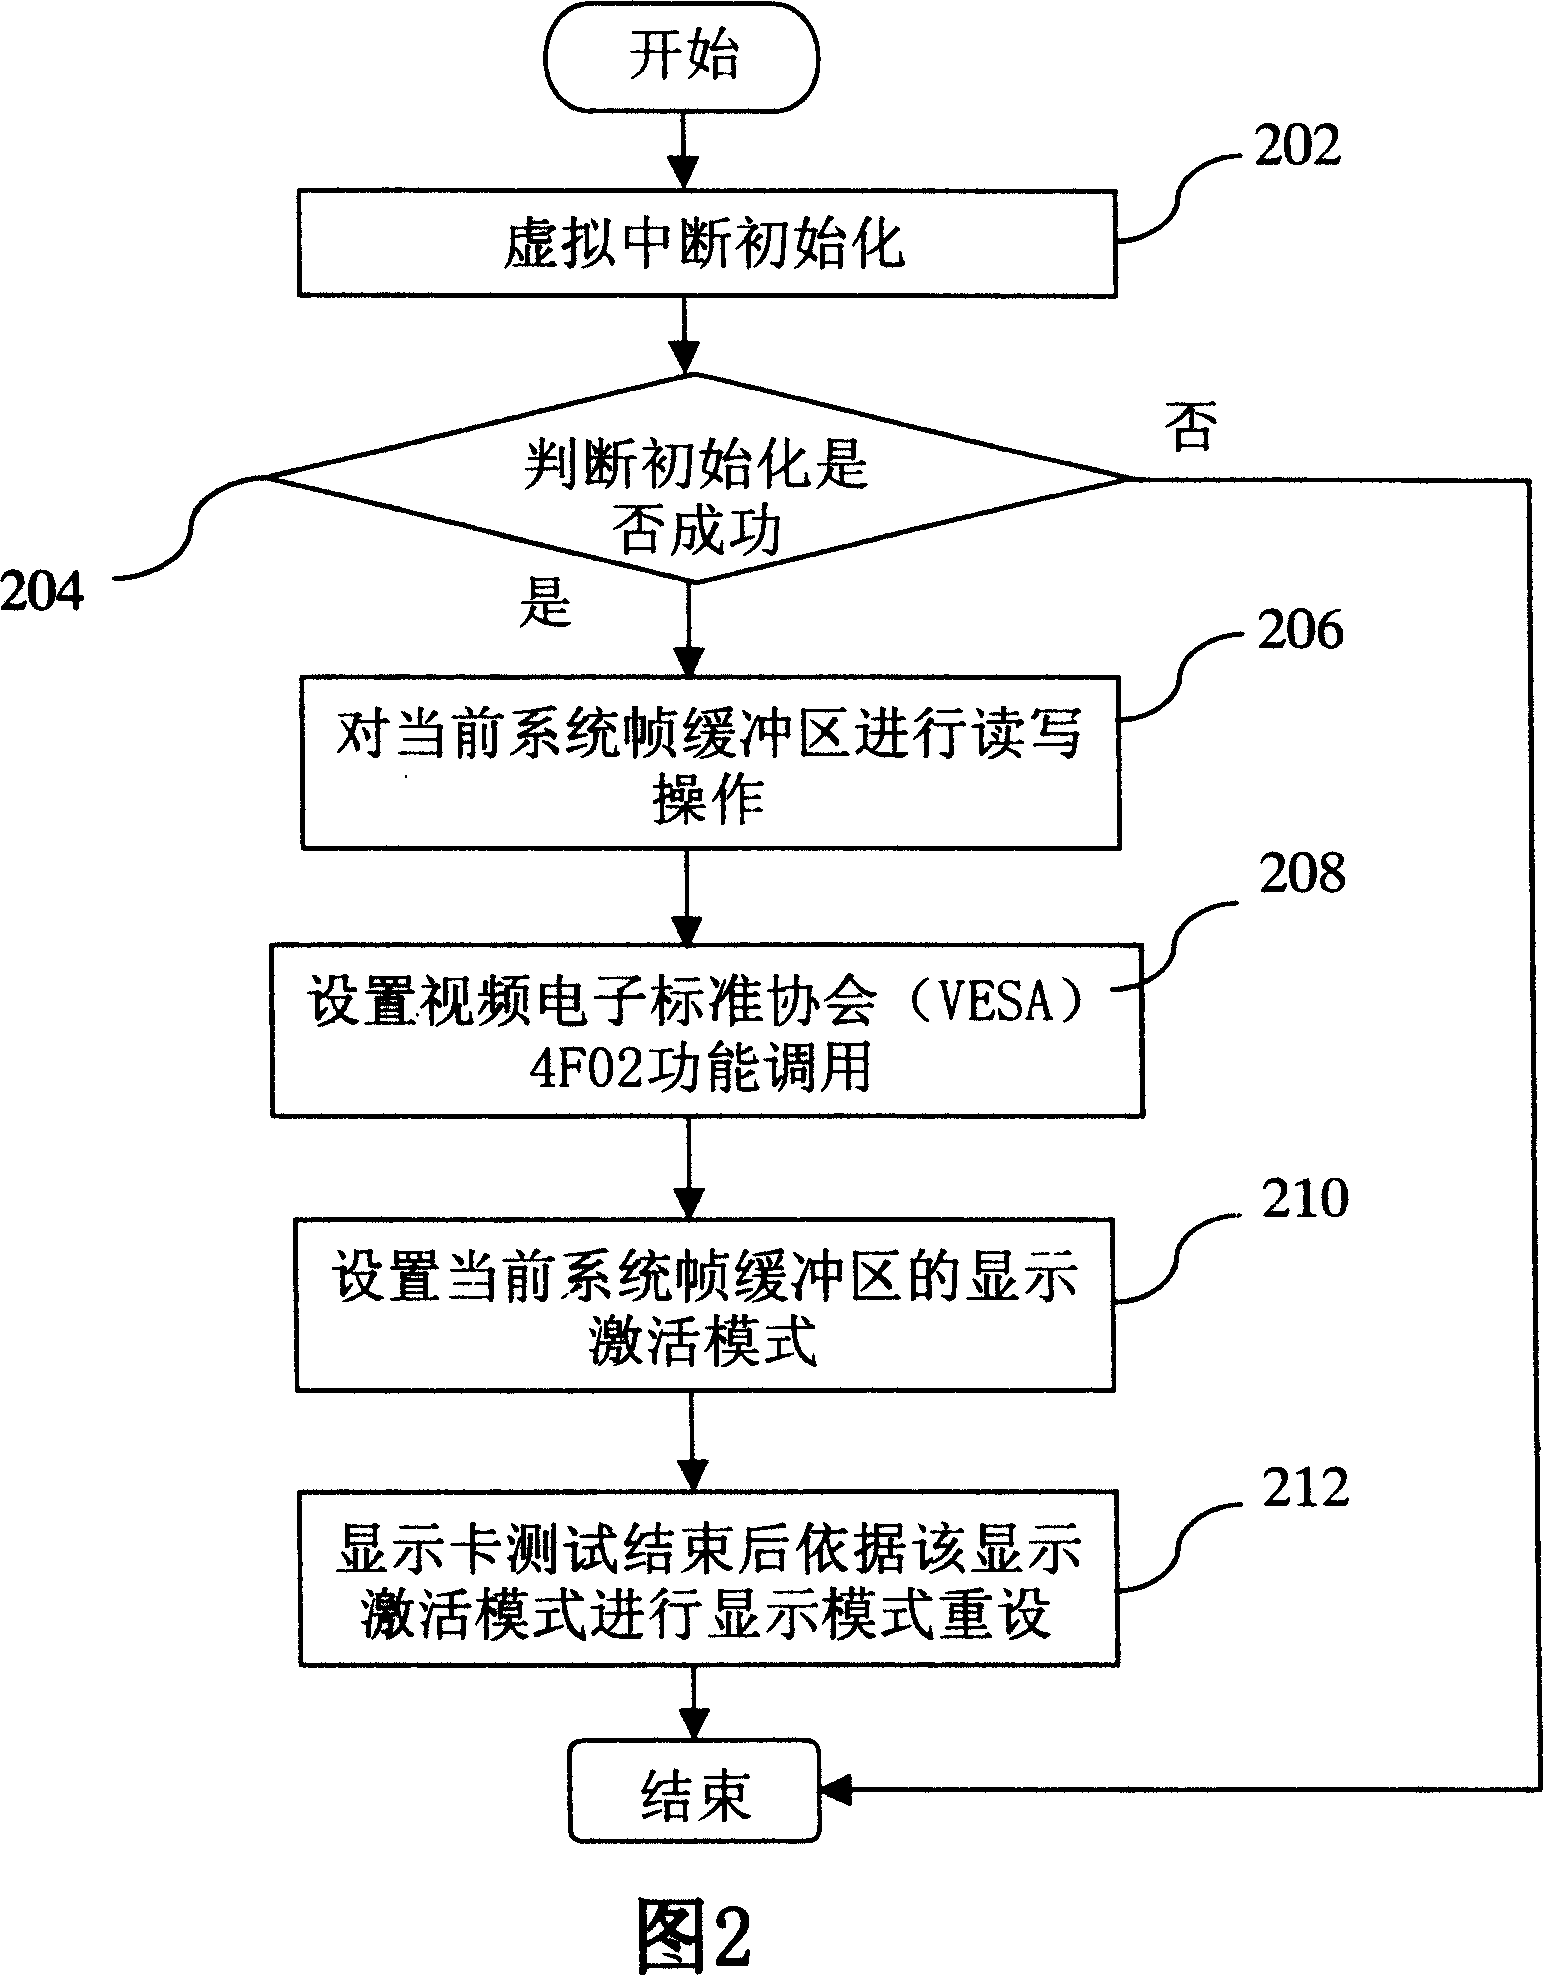 Protecting method for frame buffer zone state